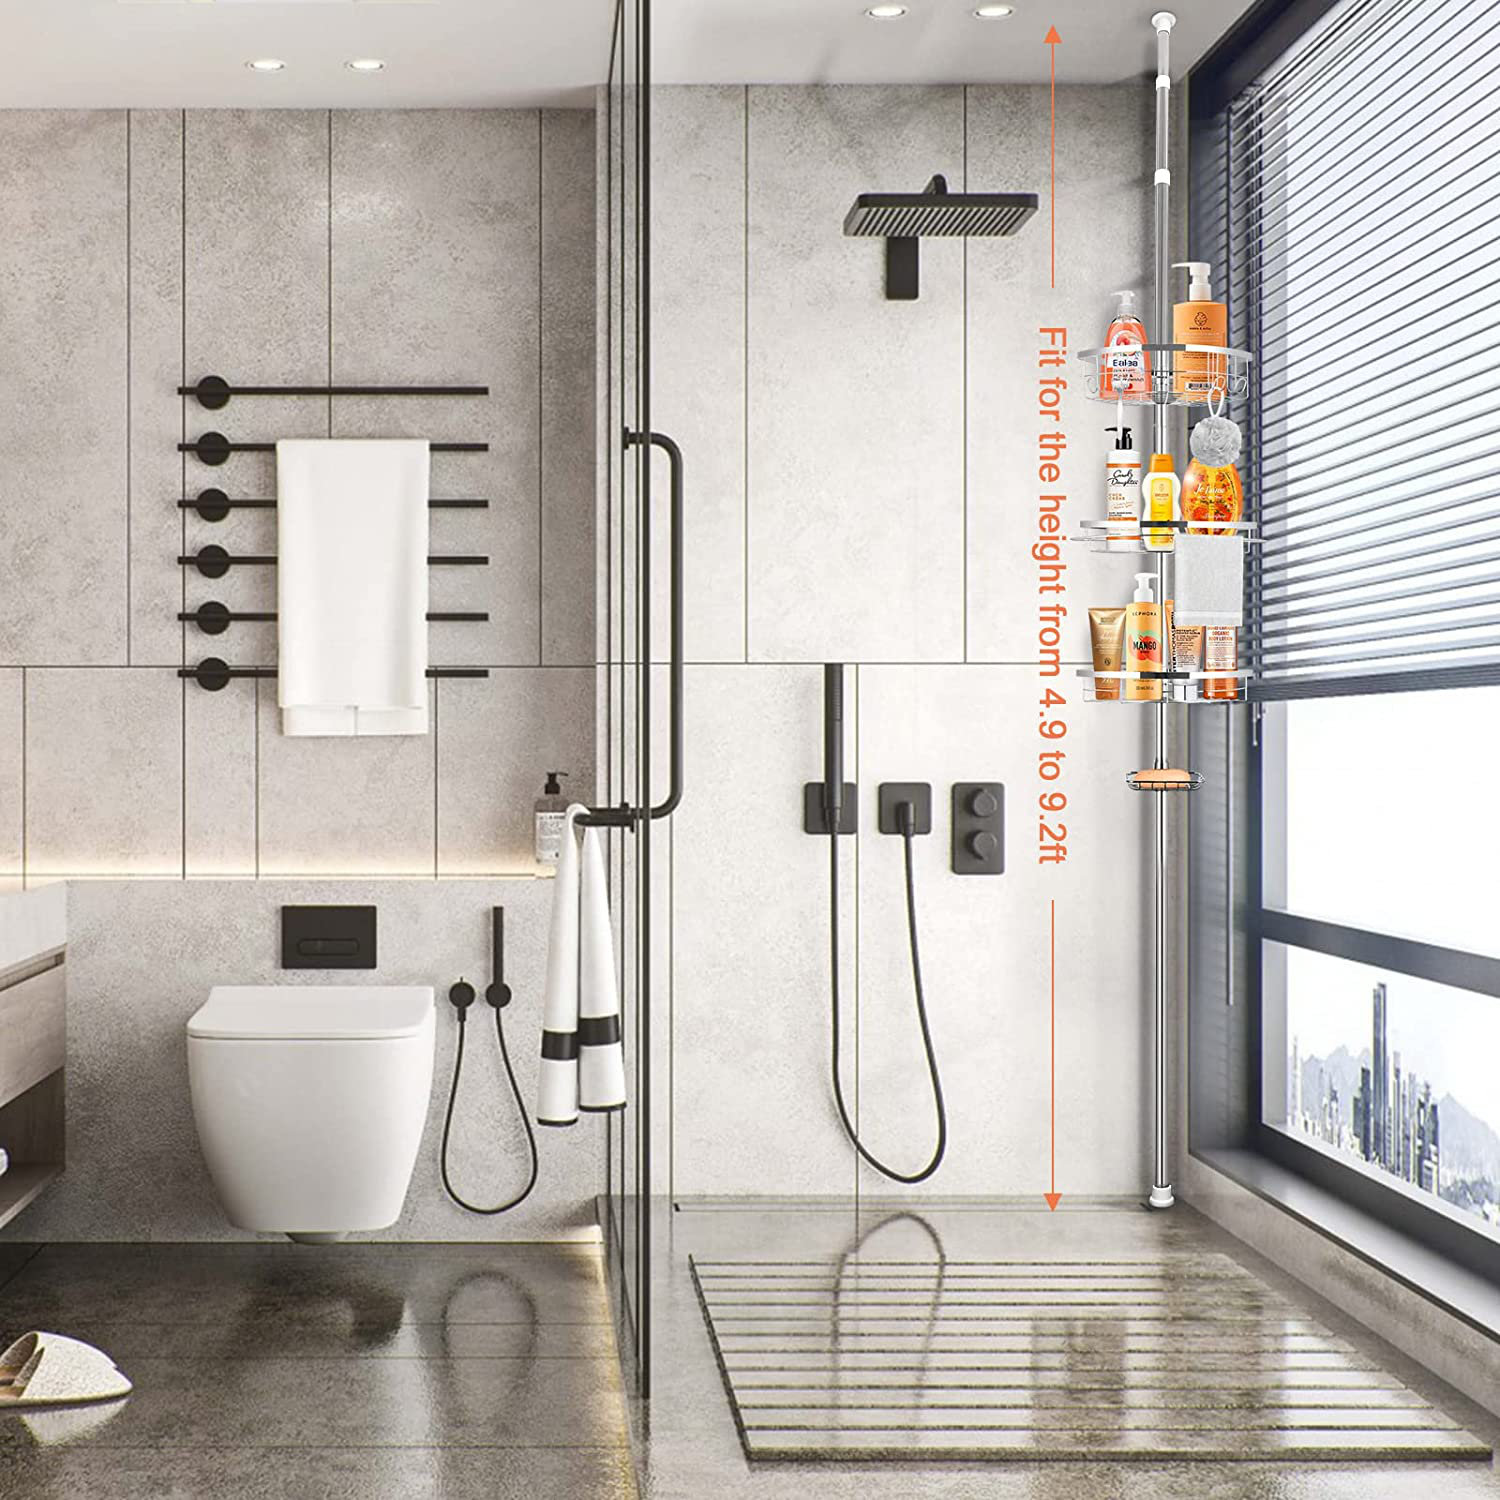 Rebrilliant Lunie Tension Pole Stainless Steel Shower Caddy